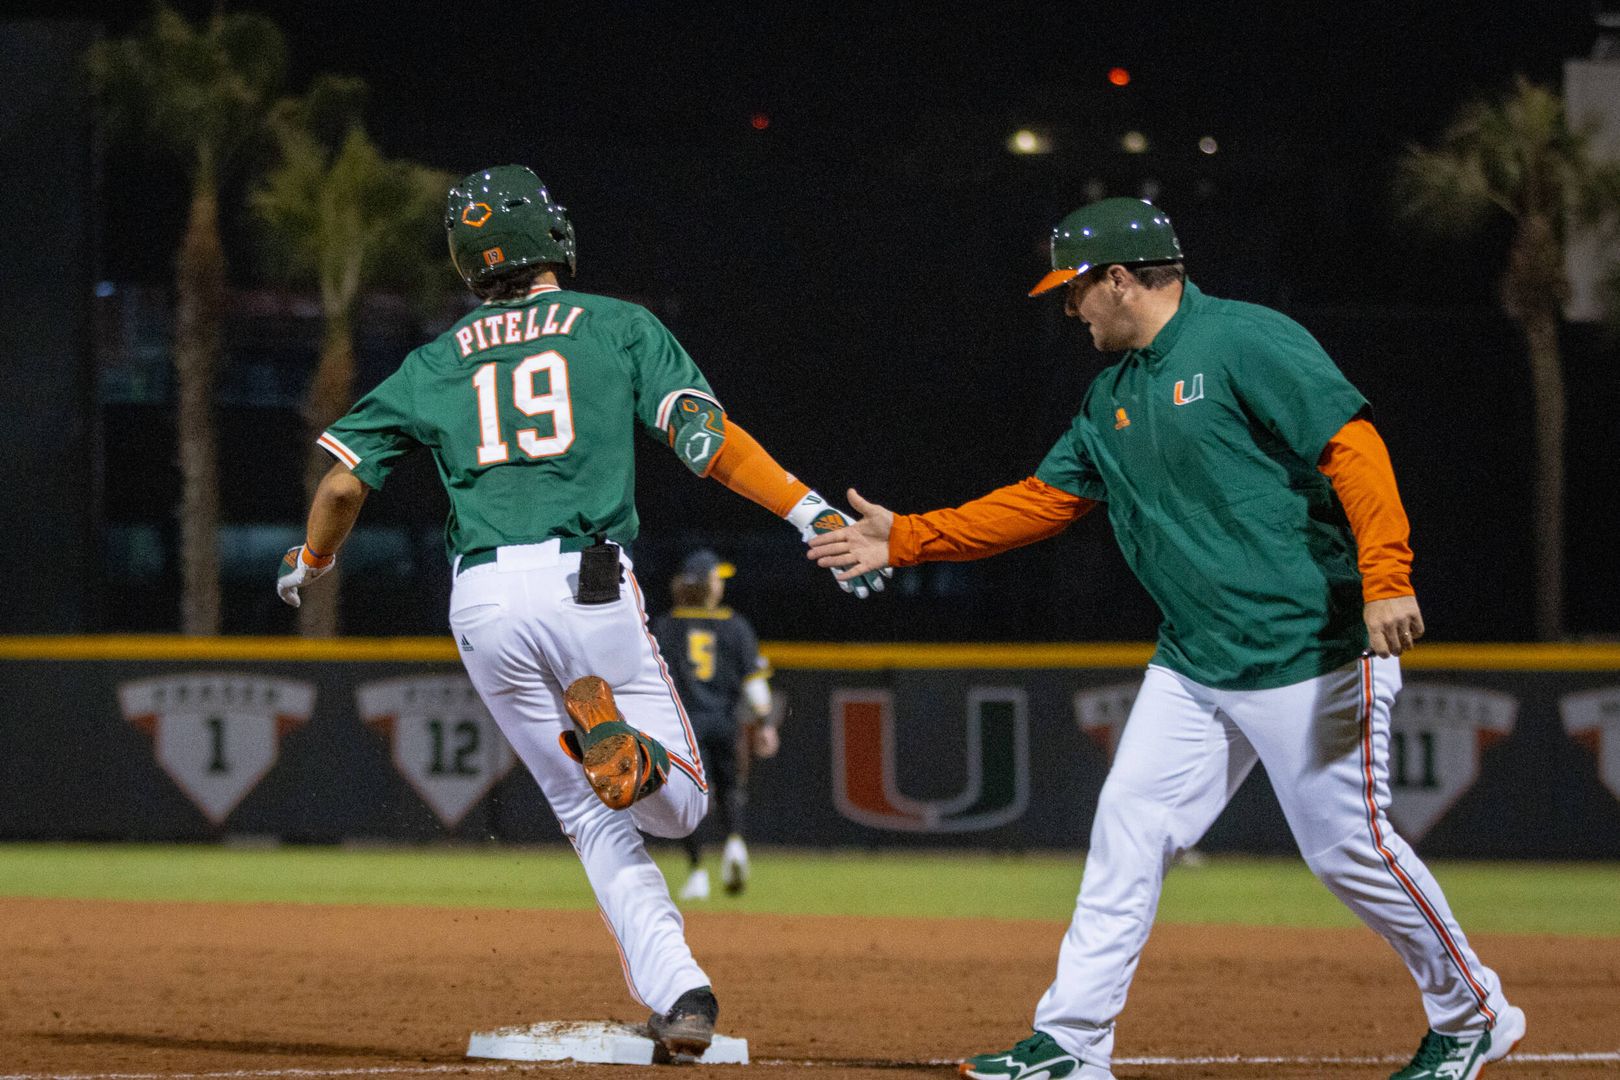 Pitelli's Career Day Pushes Hurricanes Past Towson, 10-8